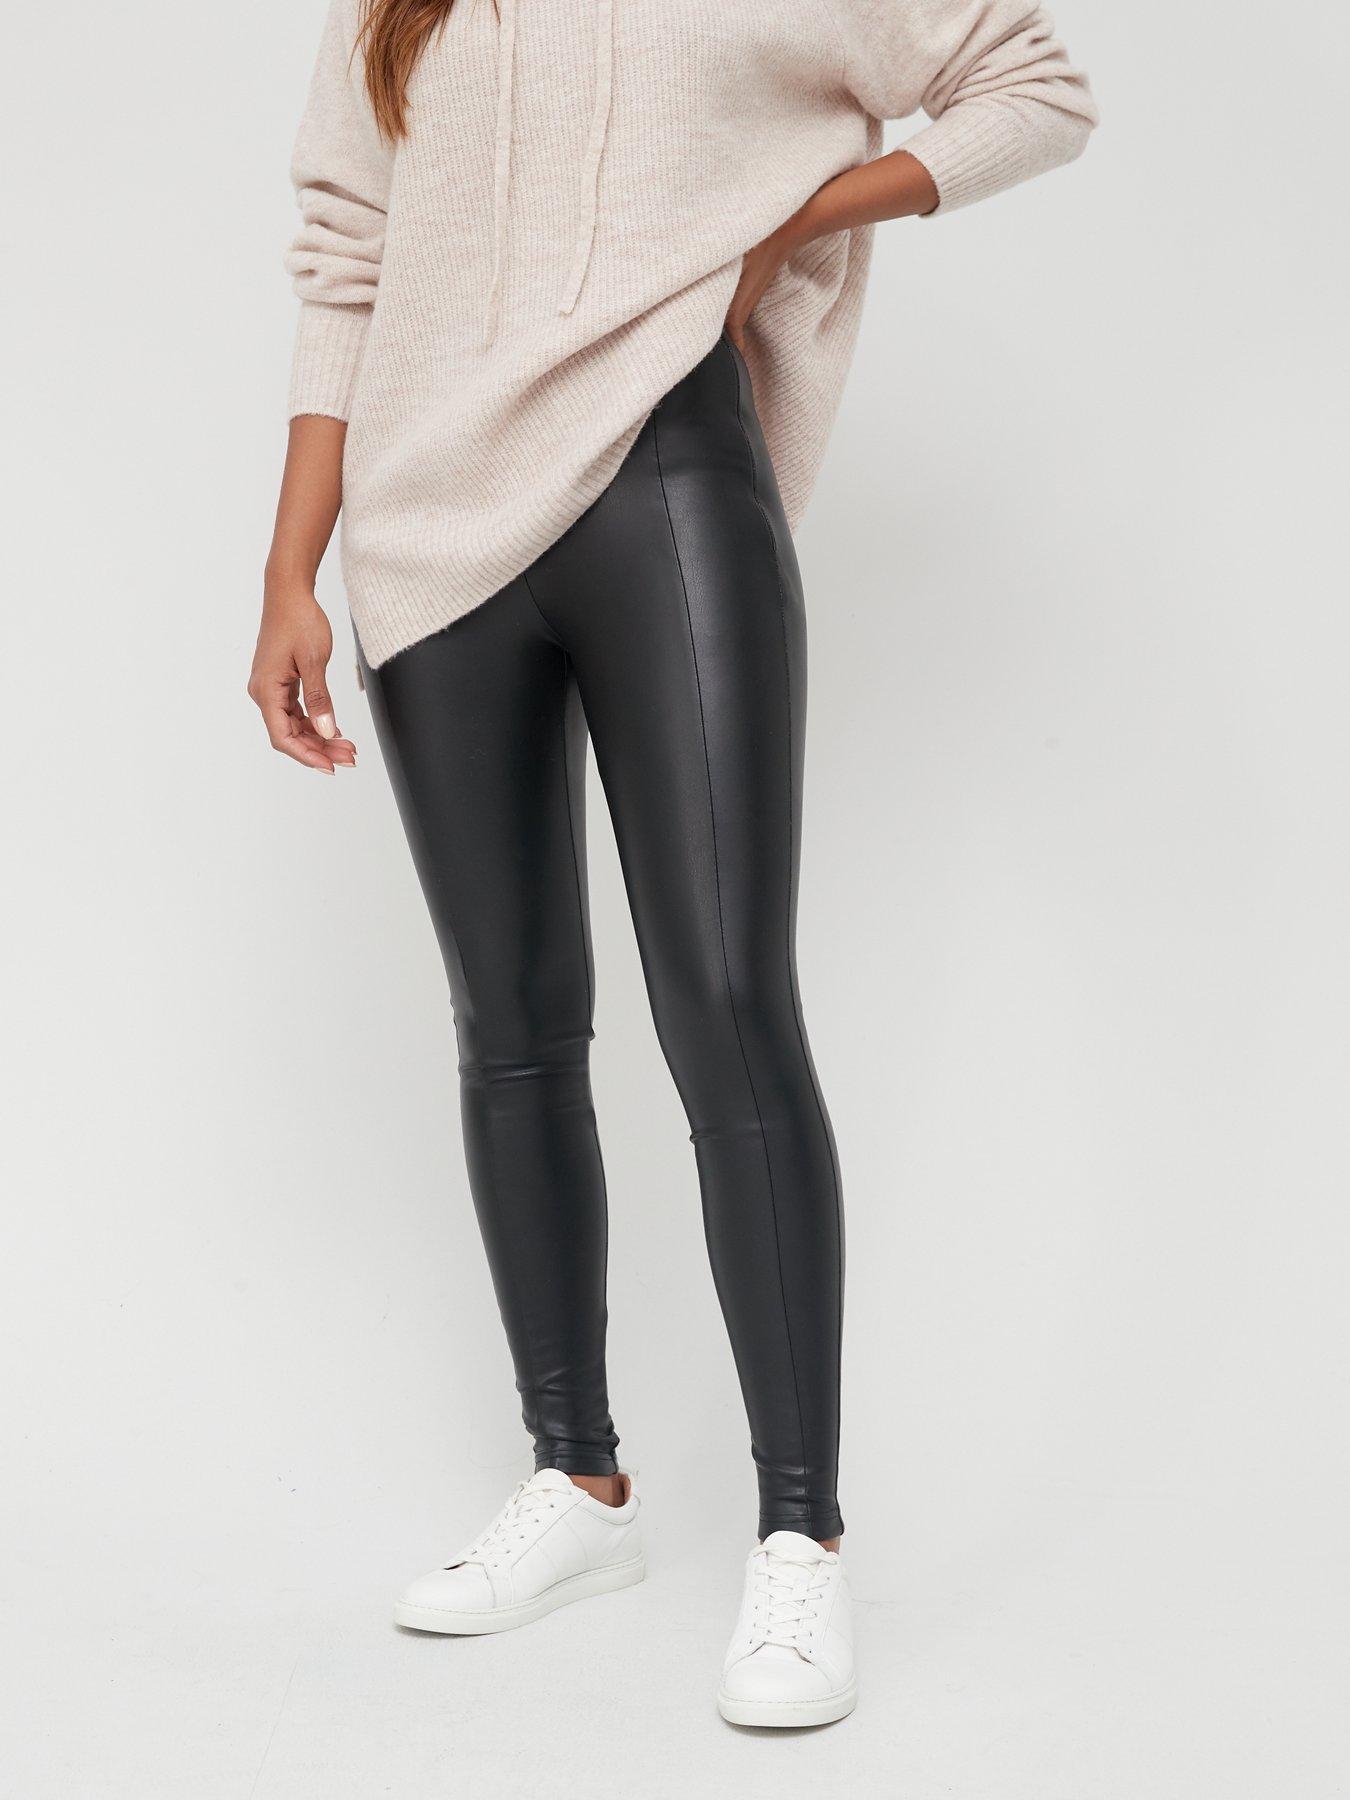 New Look Leather Leggings for Women for sale